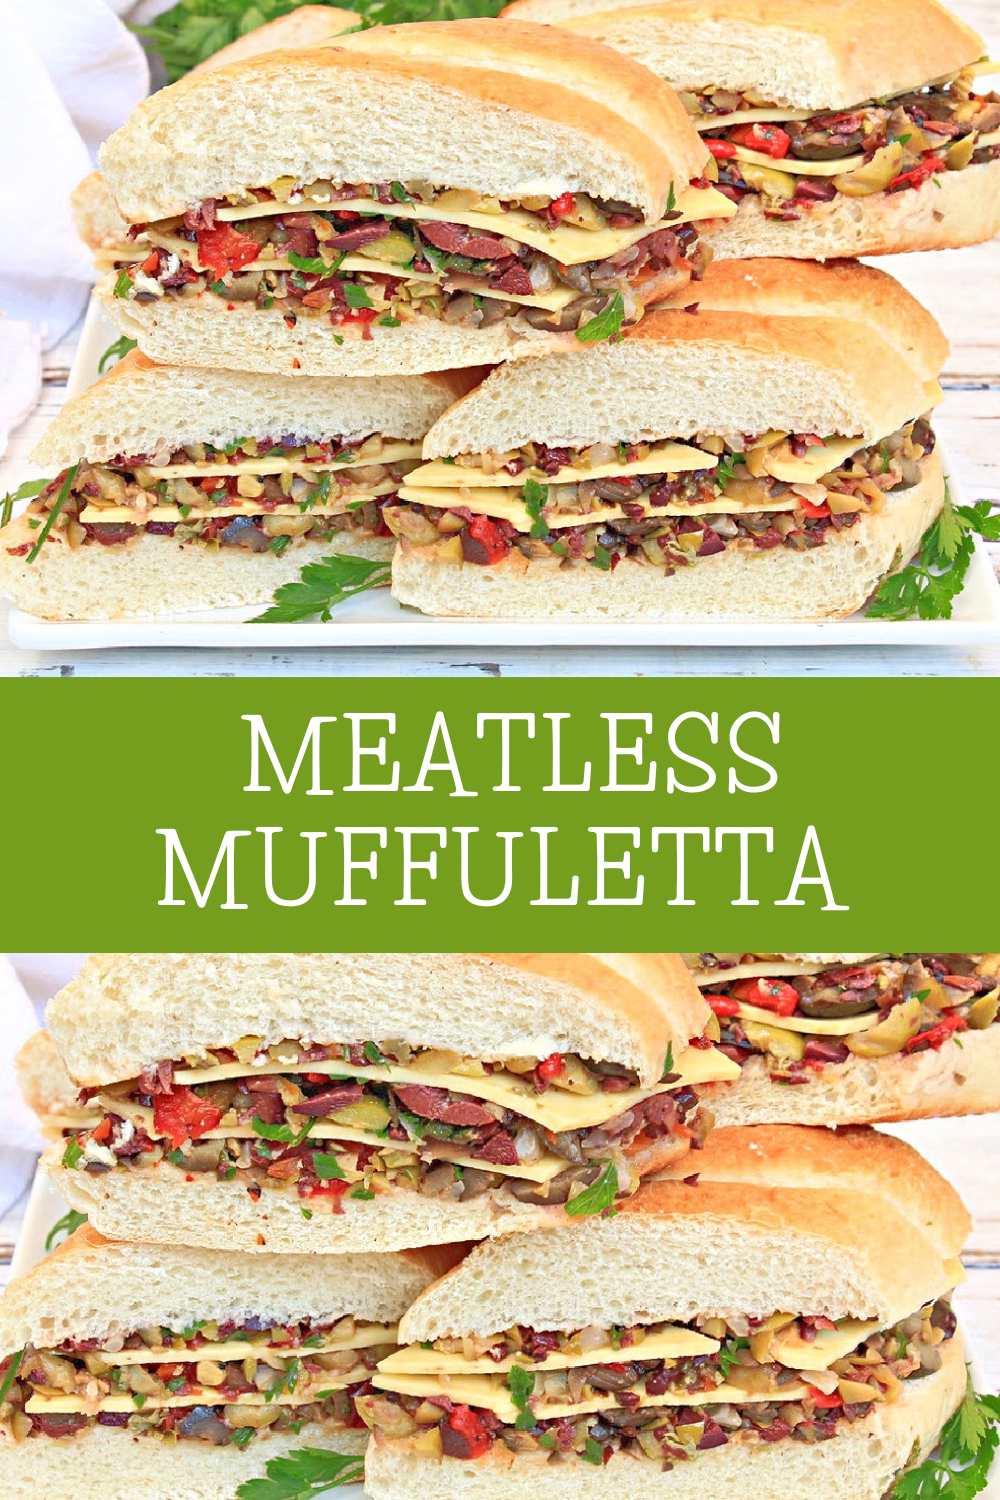 Vegan Muffuletta Subs ~ Italian deli-style olive mix, including three varieties of chopped olives, pickled veggies, roasted red peppers, capers, garlic, and herbs, layered with vegan cheese and pressed between thick slices of sub bread for a flavorful meat-free spin on the New Orleans classic! via @thiswifecooks